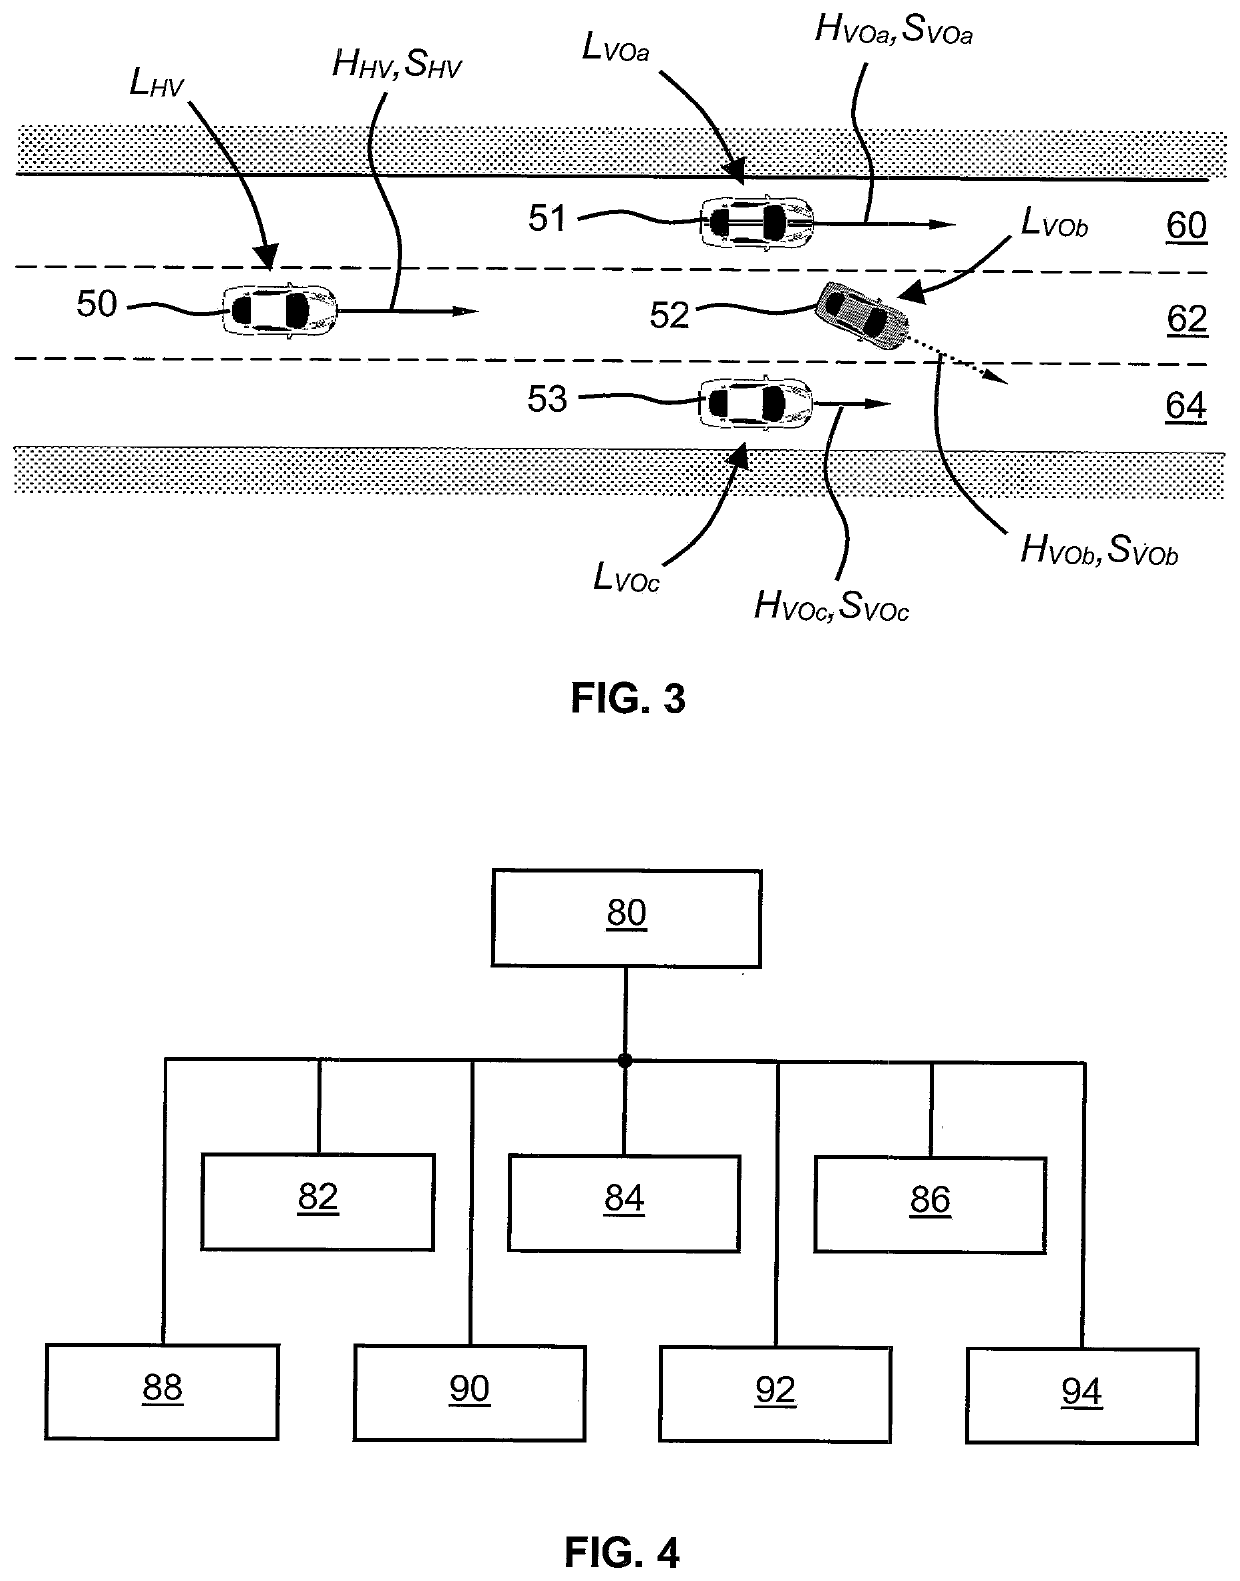 System, method and controller for graph-based path planning for a host vehicle